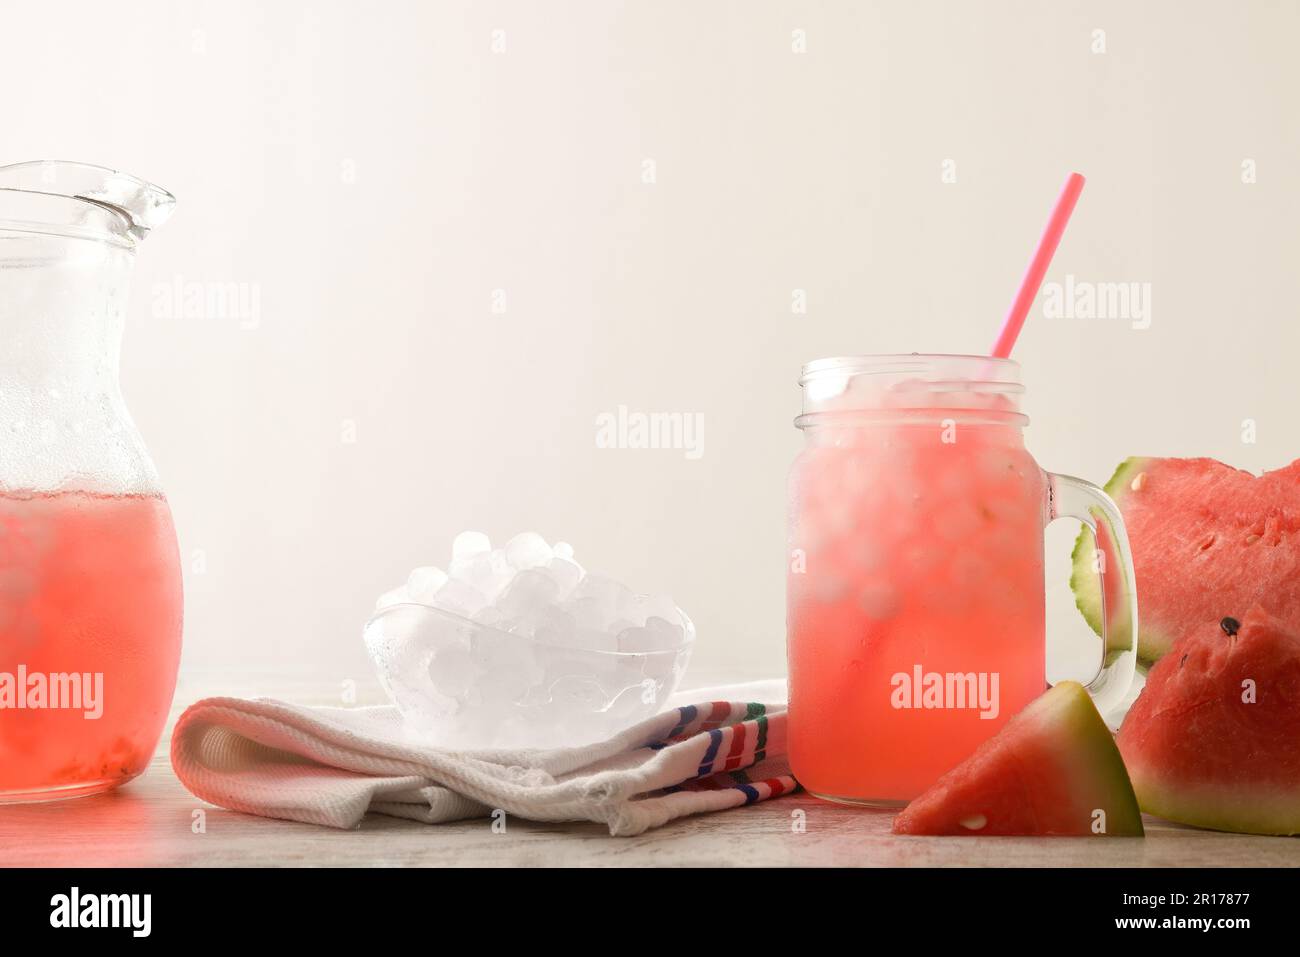 Freshly prepared watermelon drink with crushed ice on table with cut fruit, crushed ice and pitcher. Front view. Horizontal composition. Stock Photo